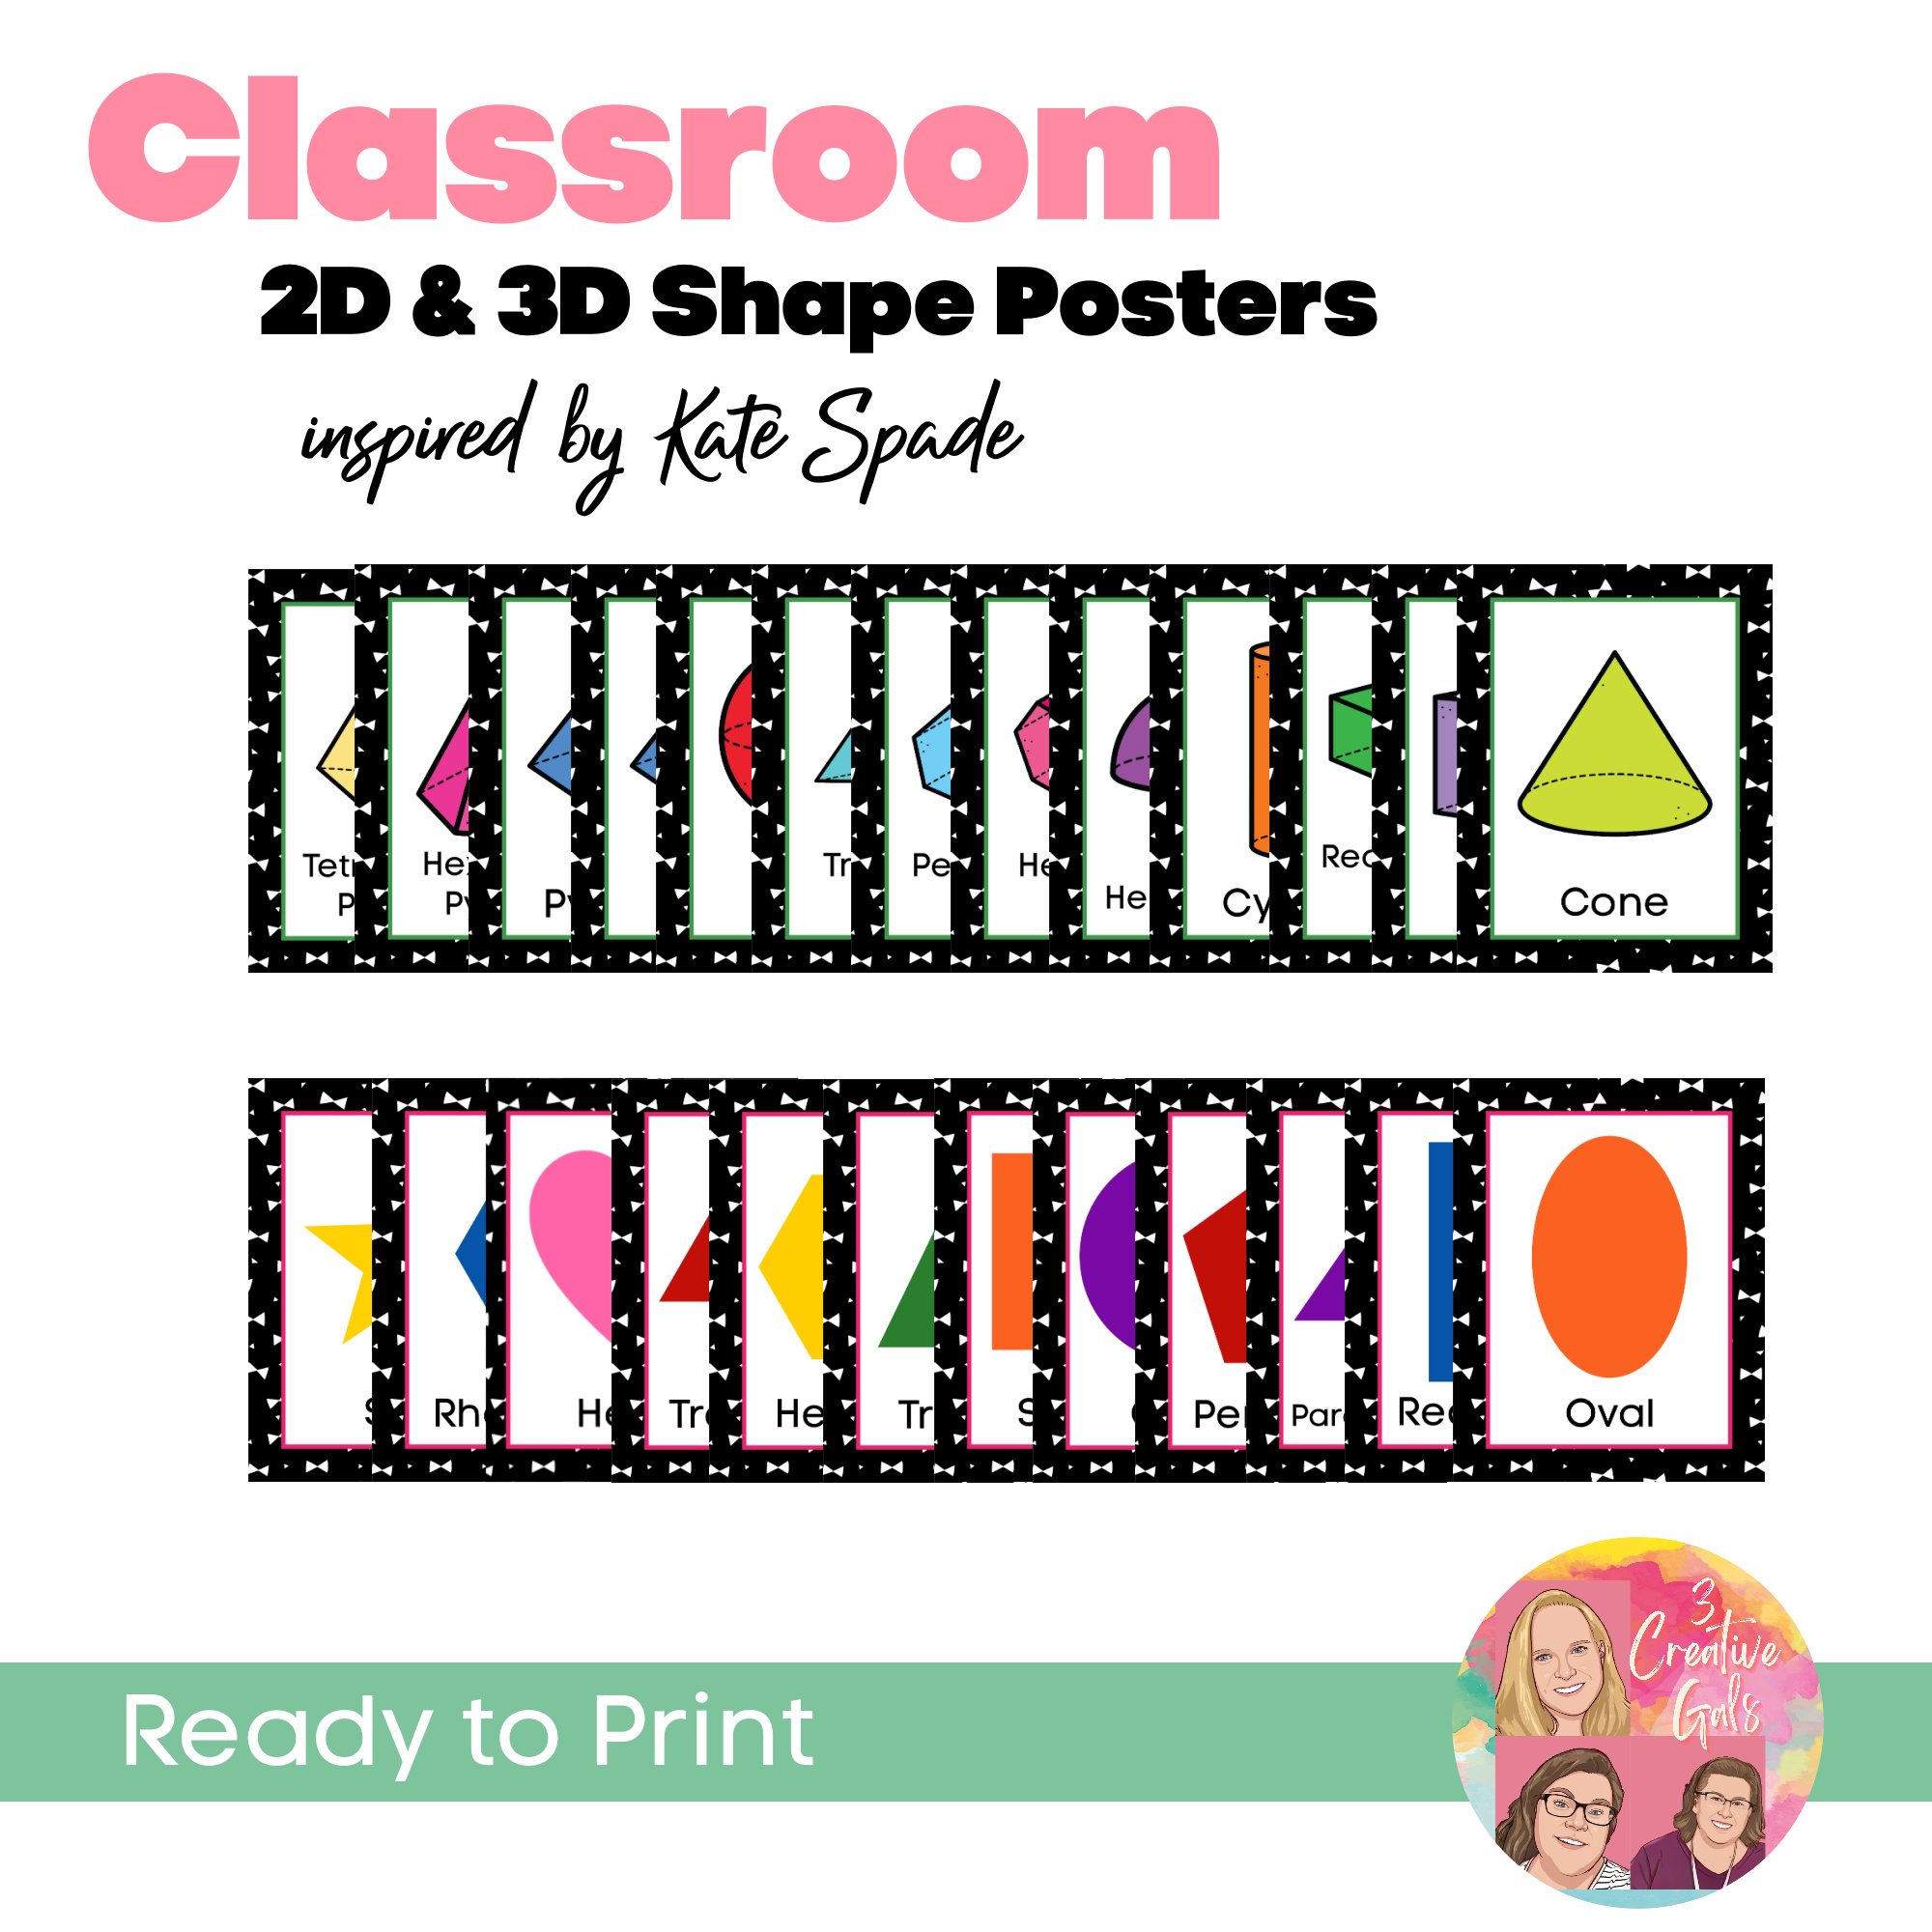 2D and 3D Shapes Posters | inspired by Kate Spade